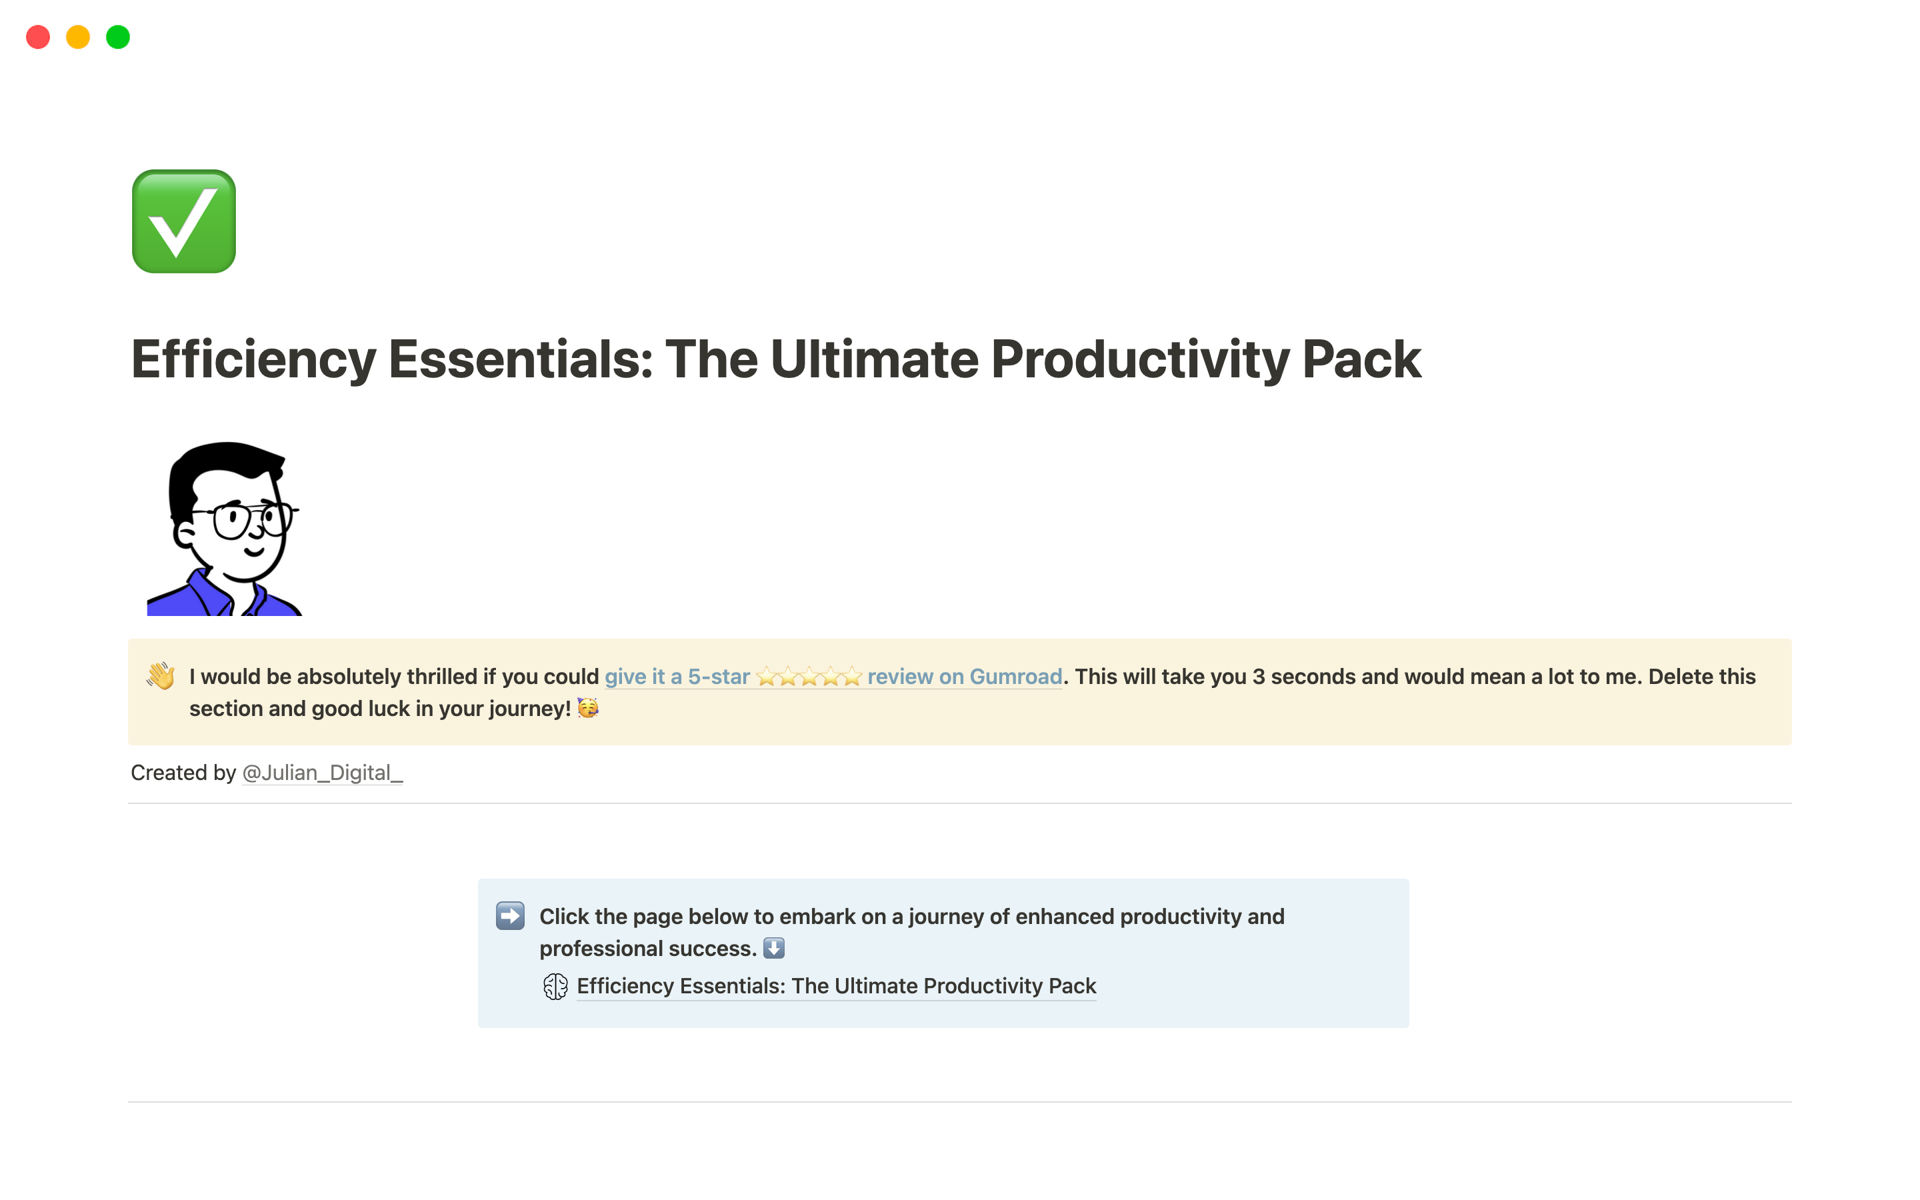 Efficiency Essentials: The Ultimate Productivity Pack is a comprehensive and powerful tool designed to enhance productivity and transform the way individuals manage their time, set goals, and accomplish tasks.